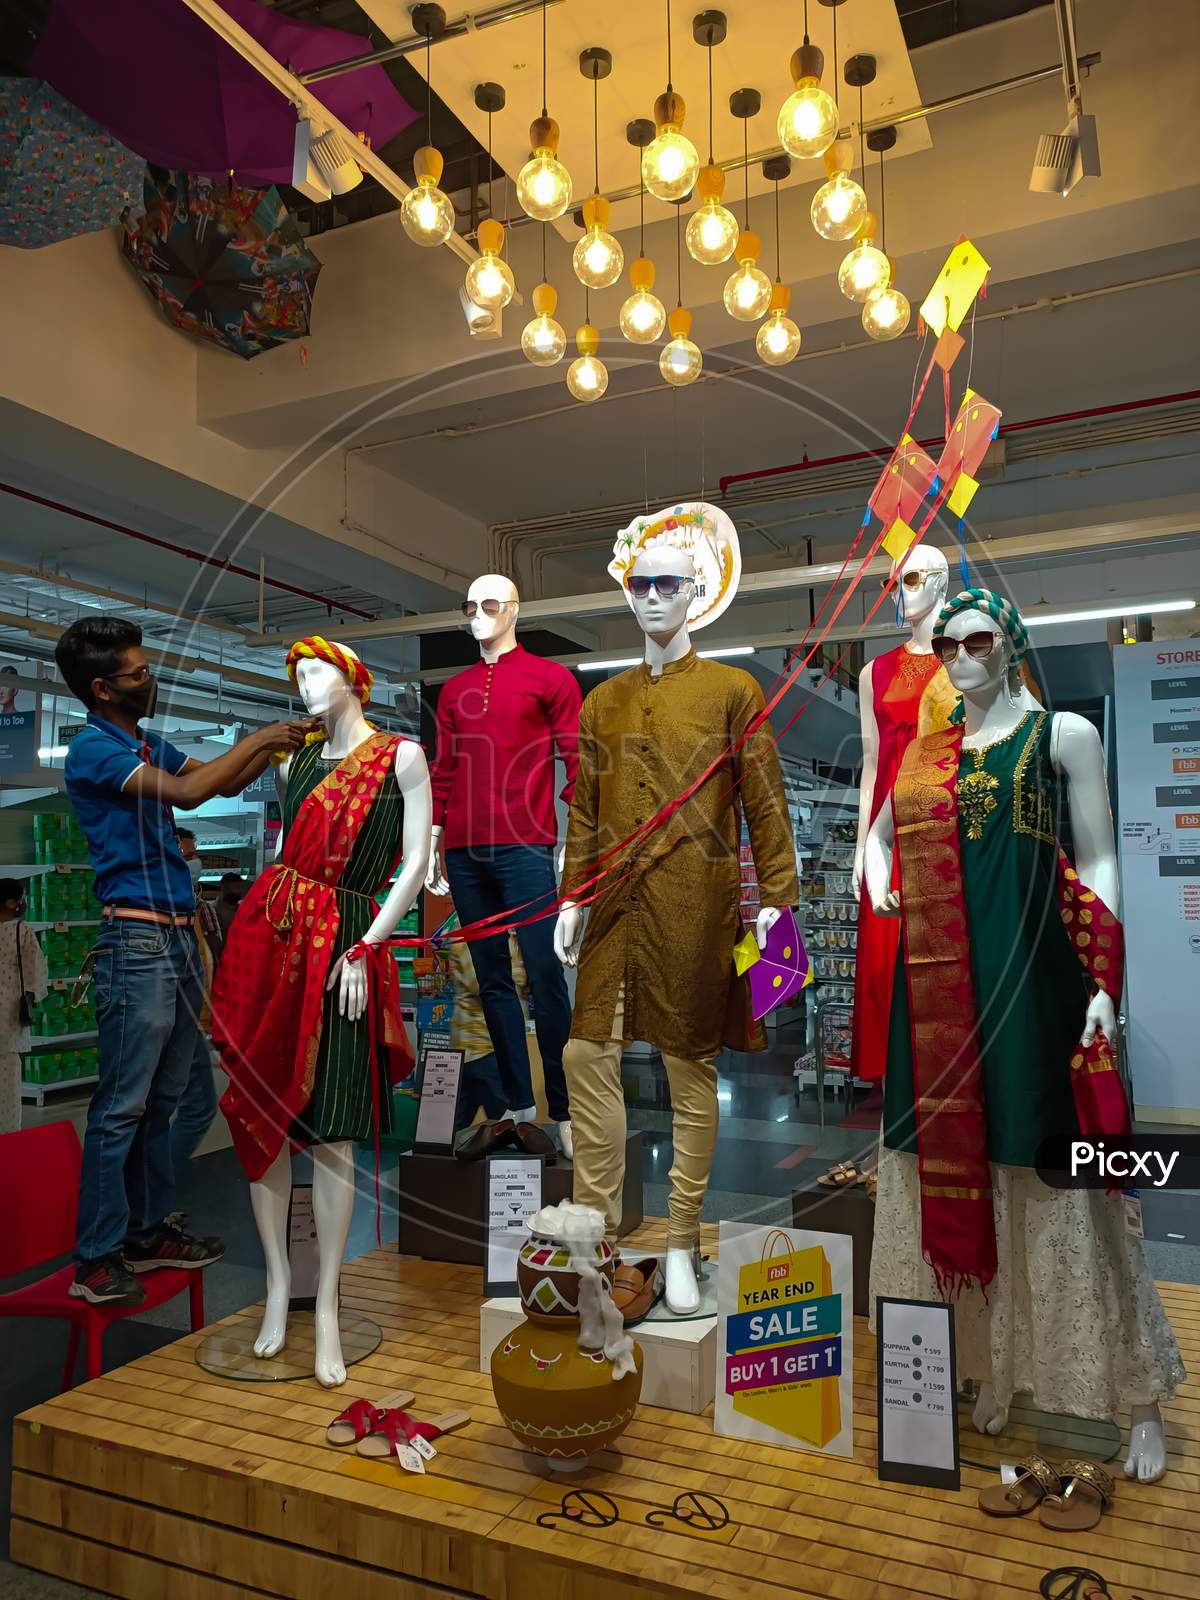 A Beautiful evening scene at a Shopping Bazaar where a Staff is seen dressing up a Mannequin with a  traditional Indian Ladies Kurtis dress at Mysuru,India.